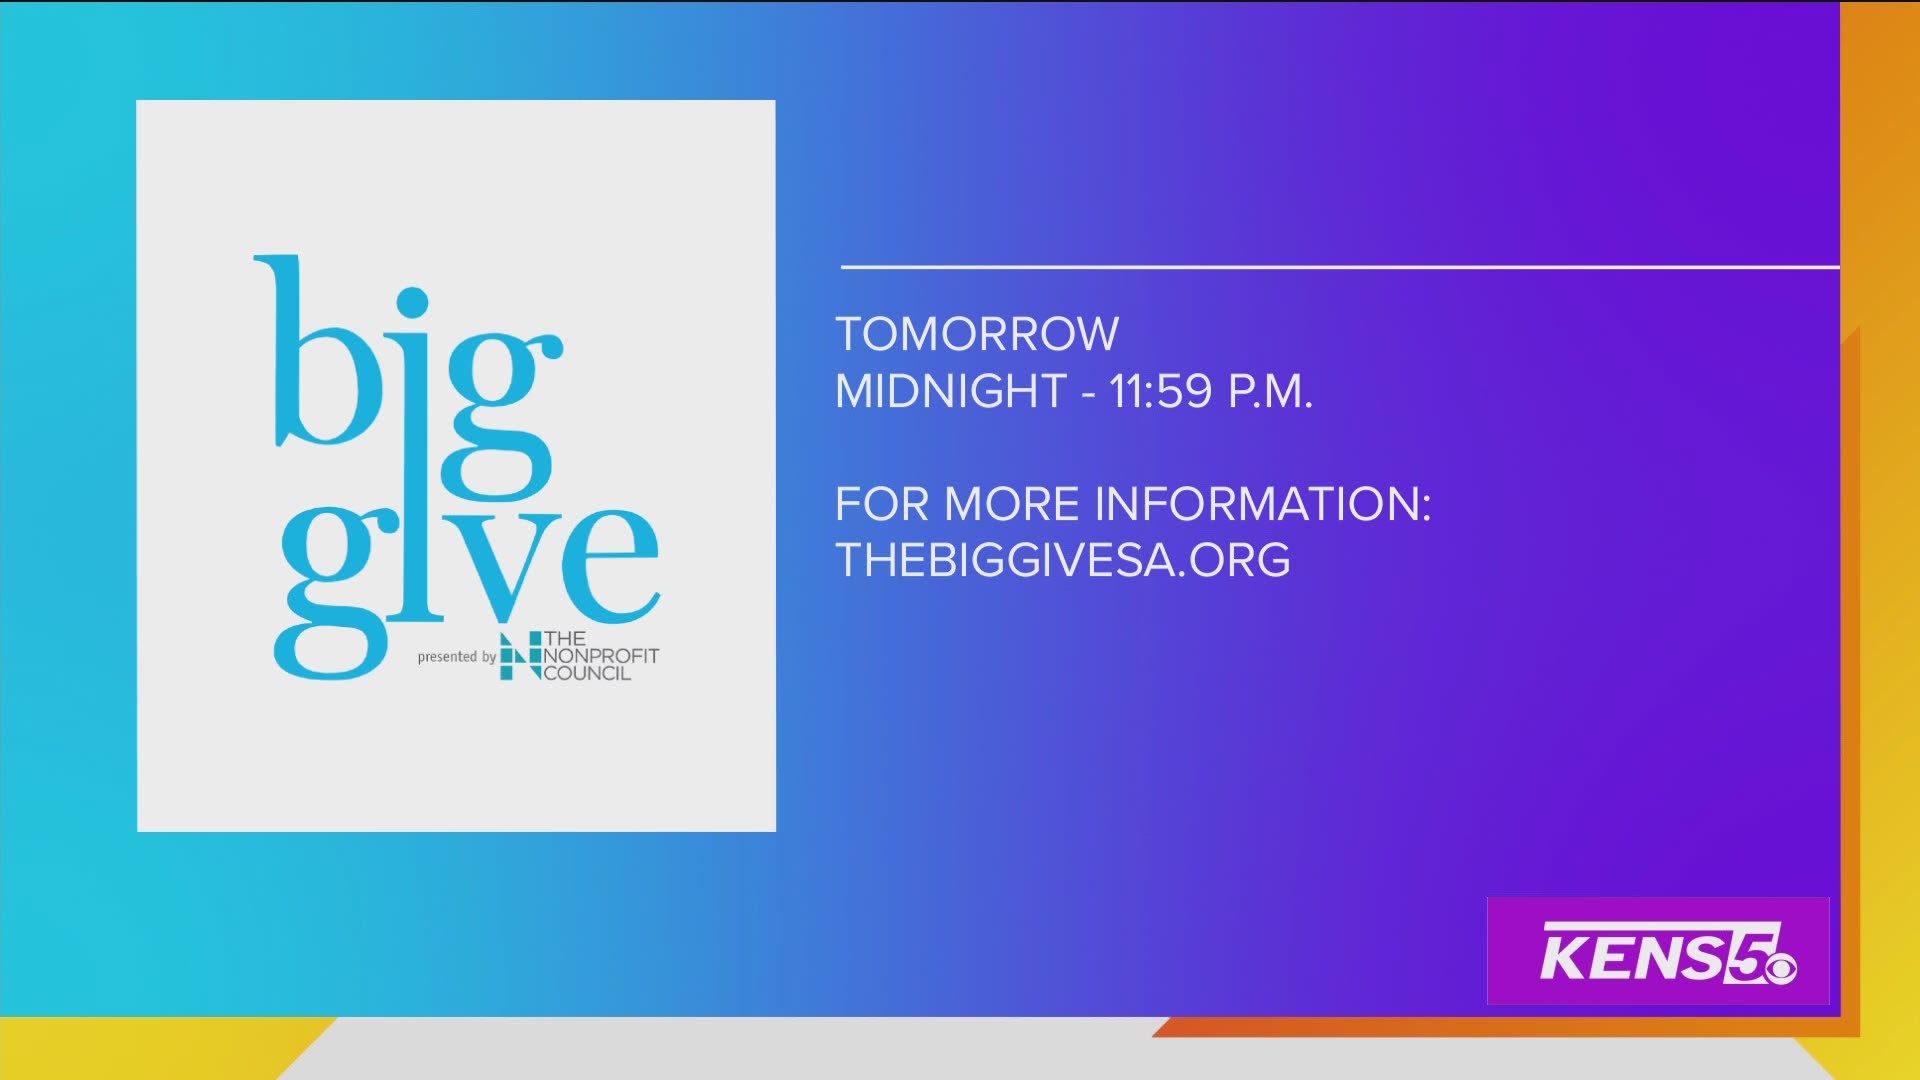 The Big Give kicks off at midnight! Learn how you can help support nonprofits in need, here in SA.